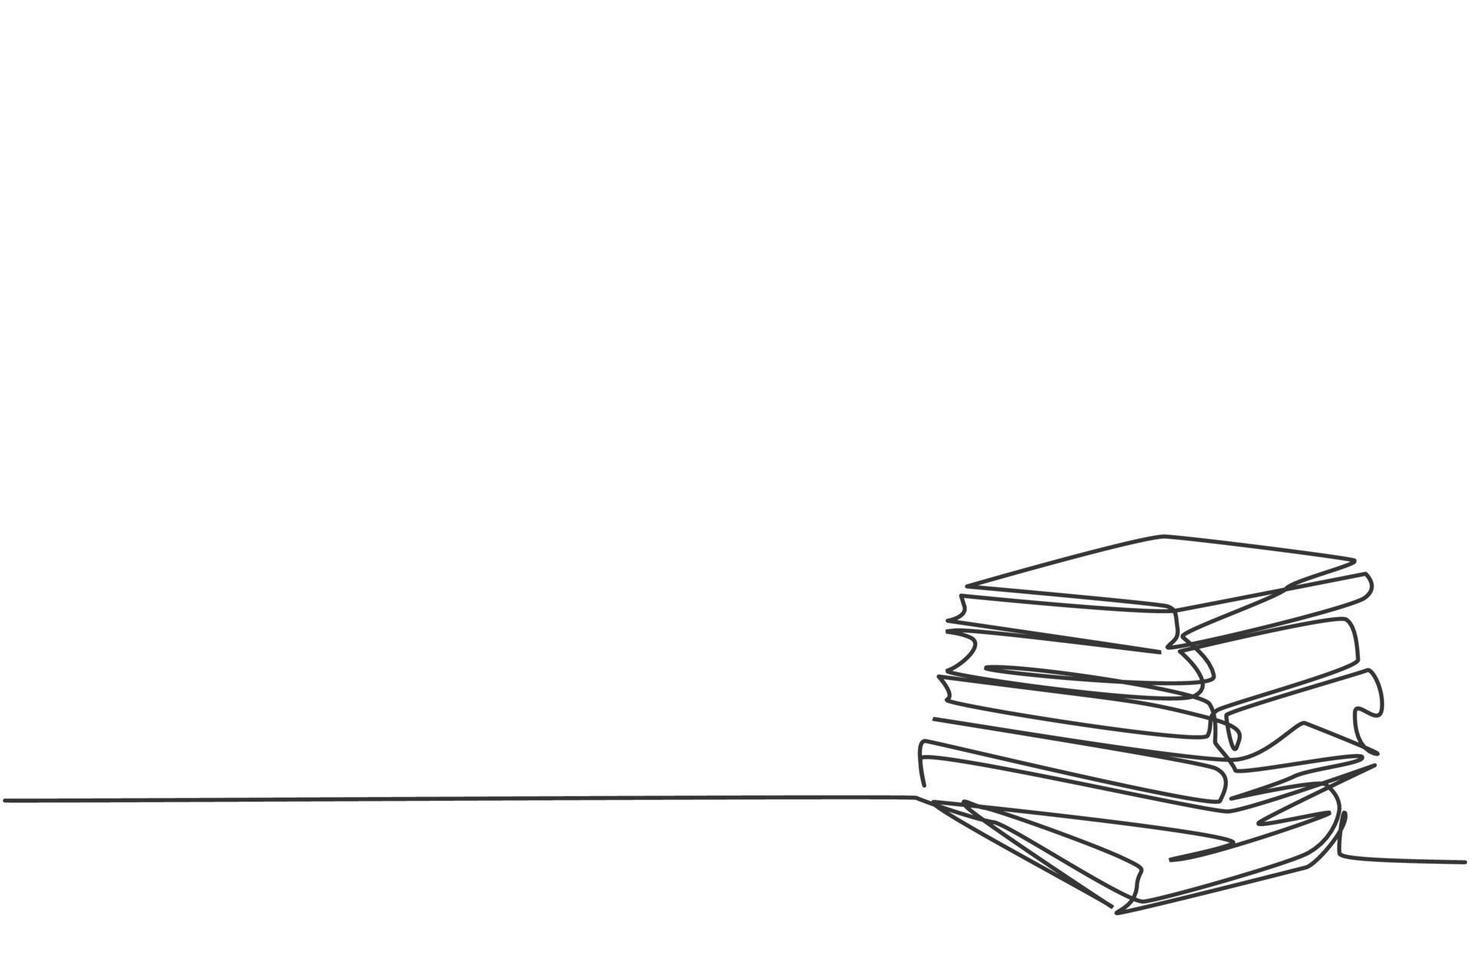 https://static.vecteezy.com/system/resources/previews/003/510/606/non_2x/single-one-line-drawing-of-books-stack-pile-of-books-icon-silhouette-for-education-concept-infographics-school-presentation-isolated-on-white-background-design-draw-graphic-illustration-vector.jpg